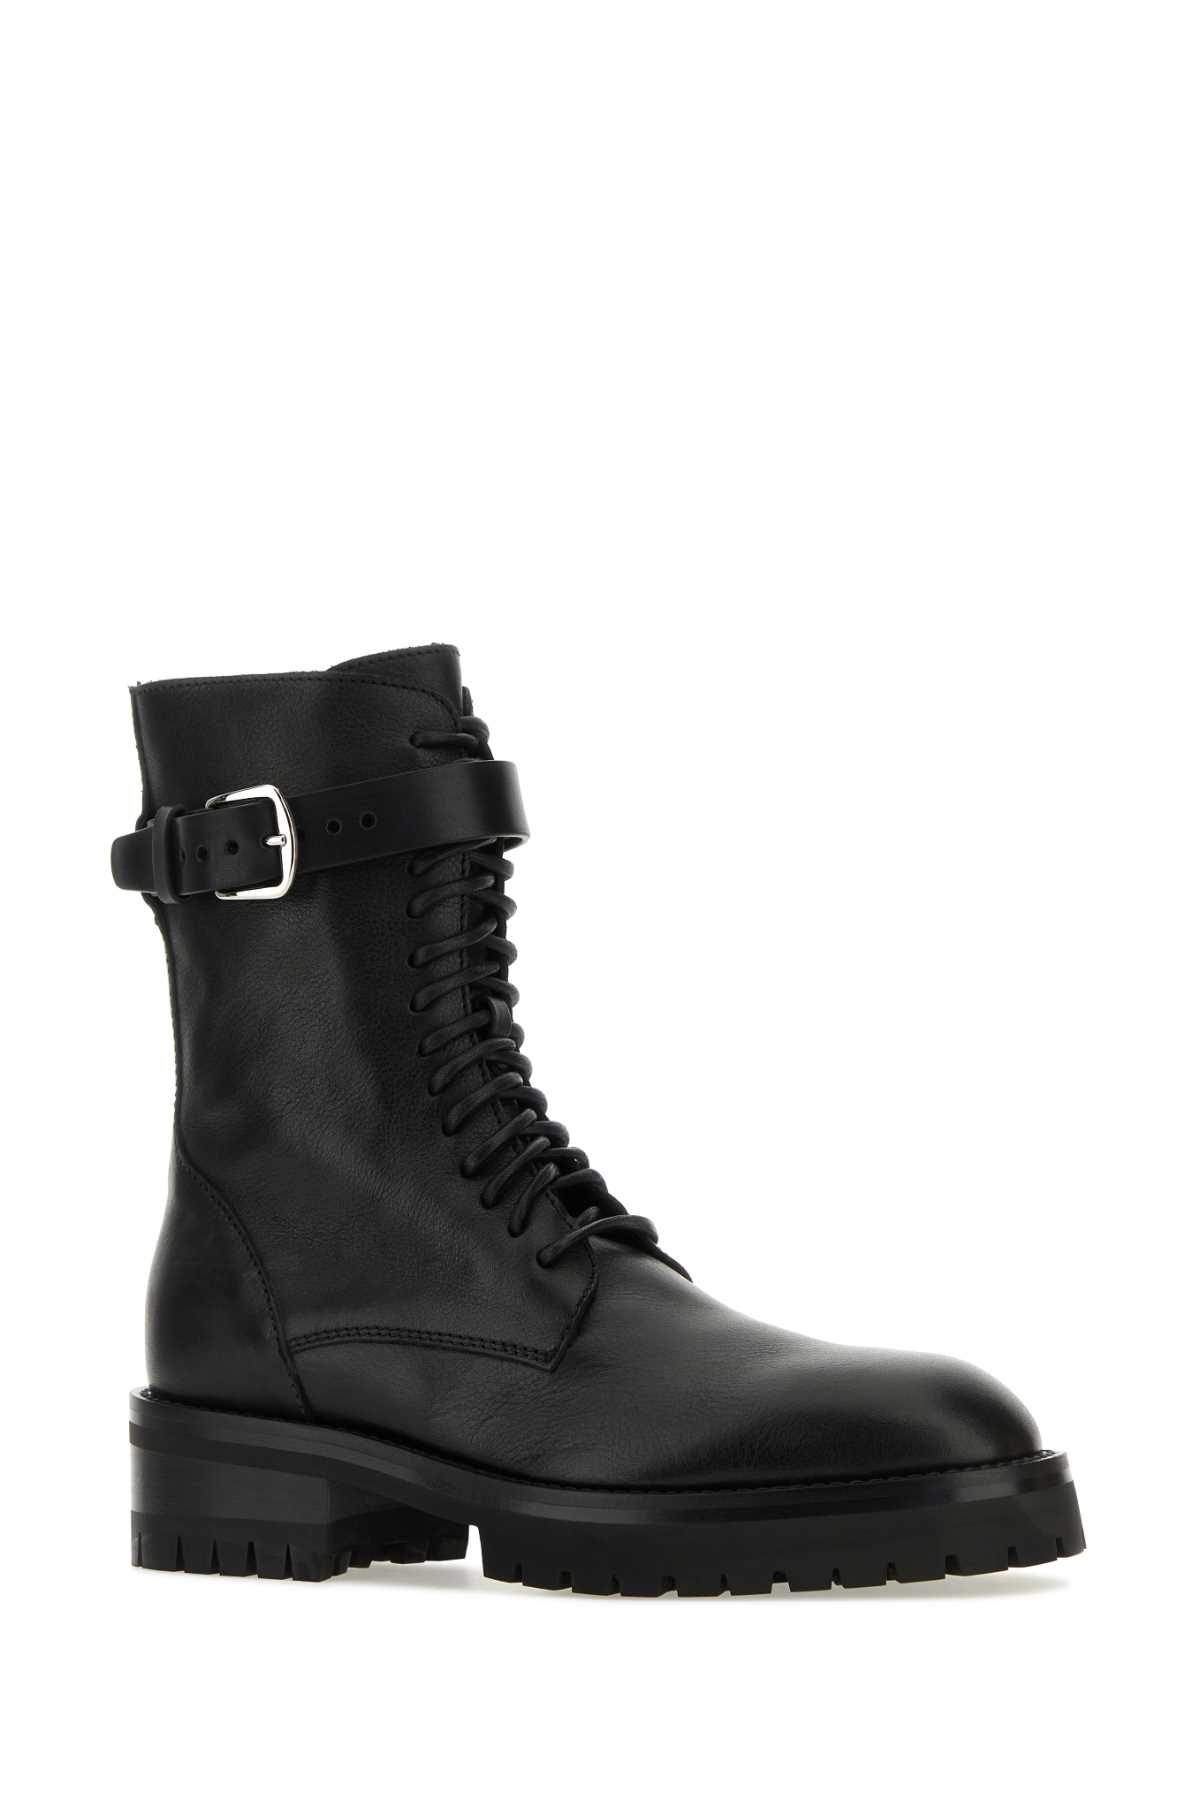 Ann Demeulemeester Black Leather Ankle Boots